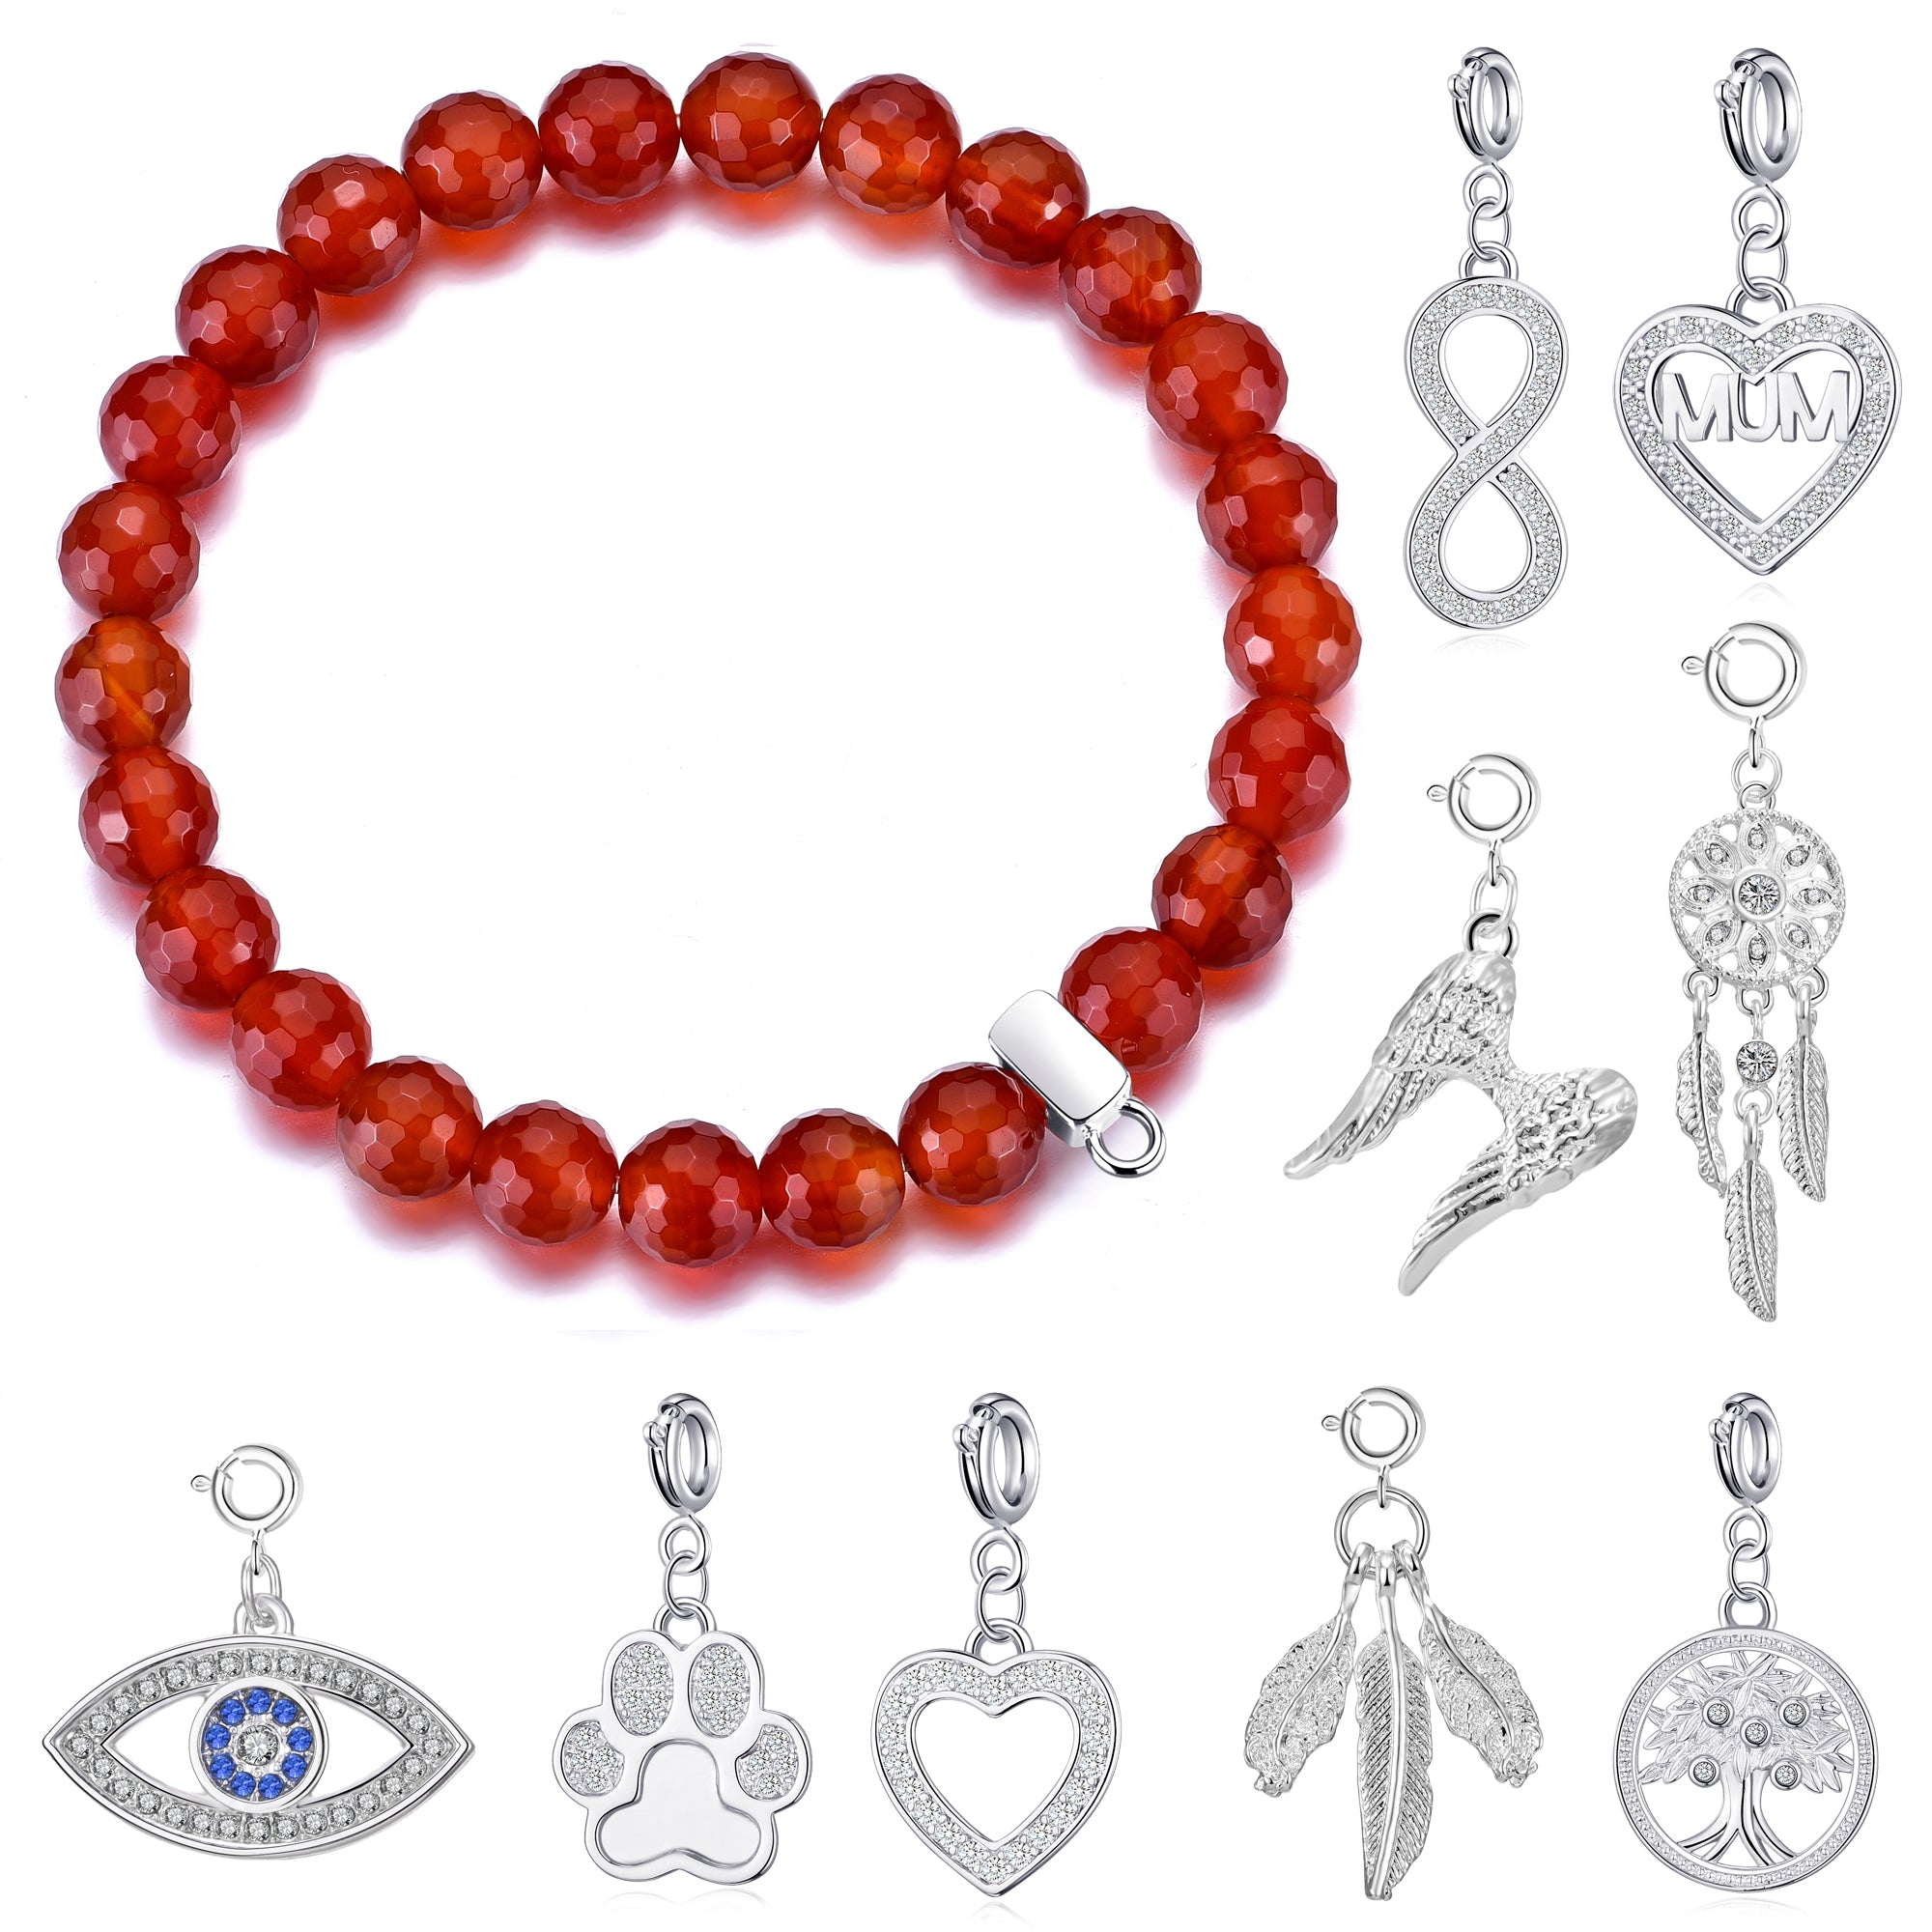 Faceted Carnelian Gemstone Stretch Bracelet with Charm Created with Zircondia® Crystals by Philip Jones Jewellery